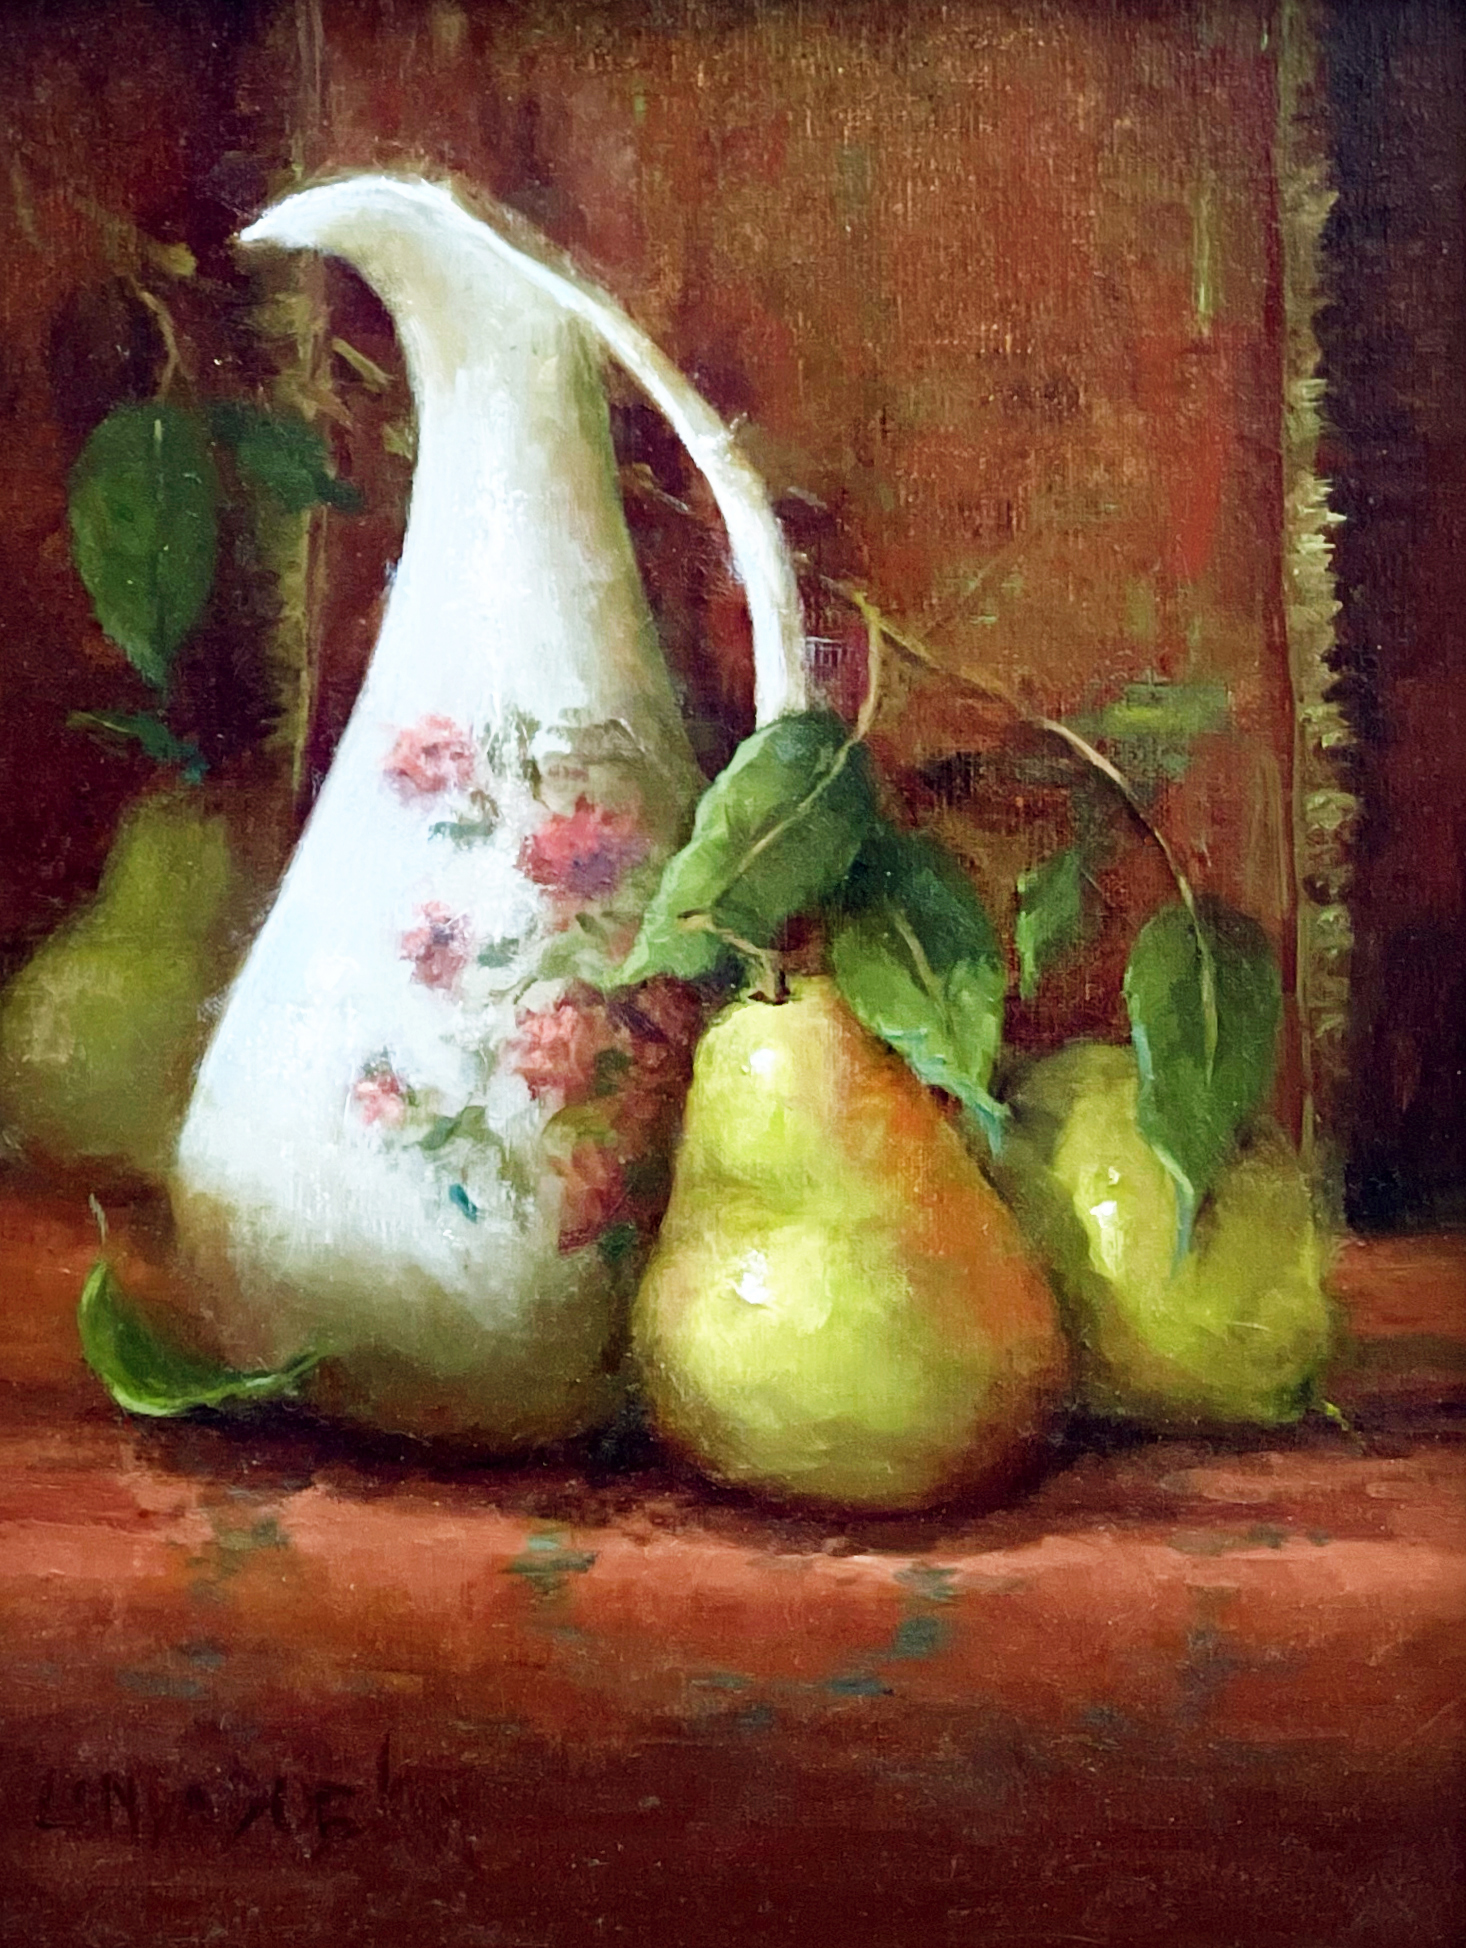 art collecting - Linda Dobkin, "Tapestry and Fruit," oil, 12 x 9 in.